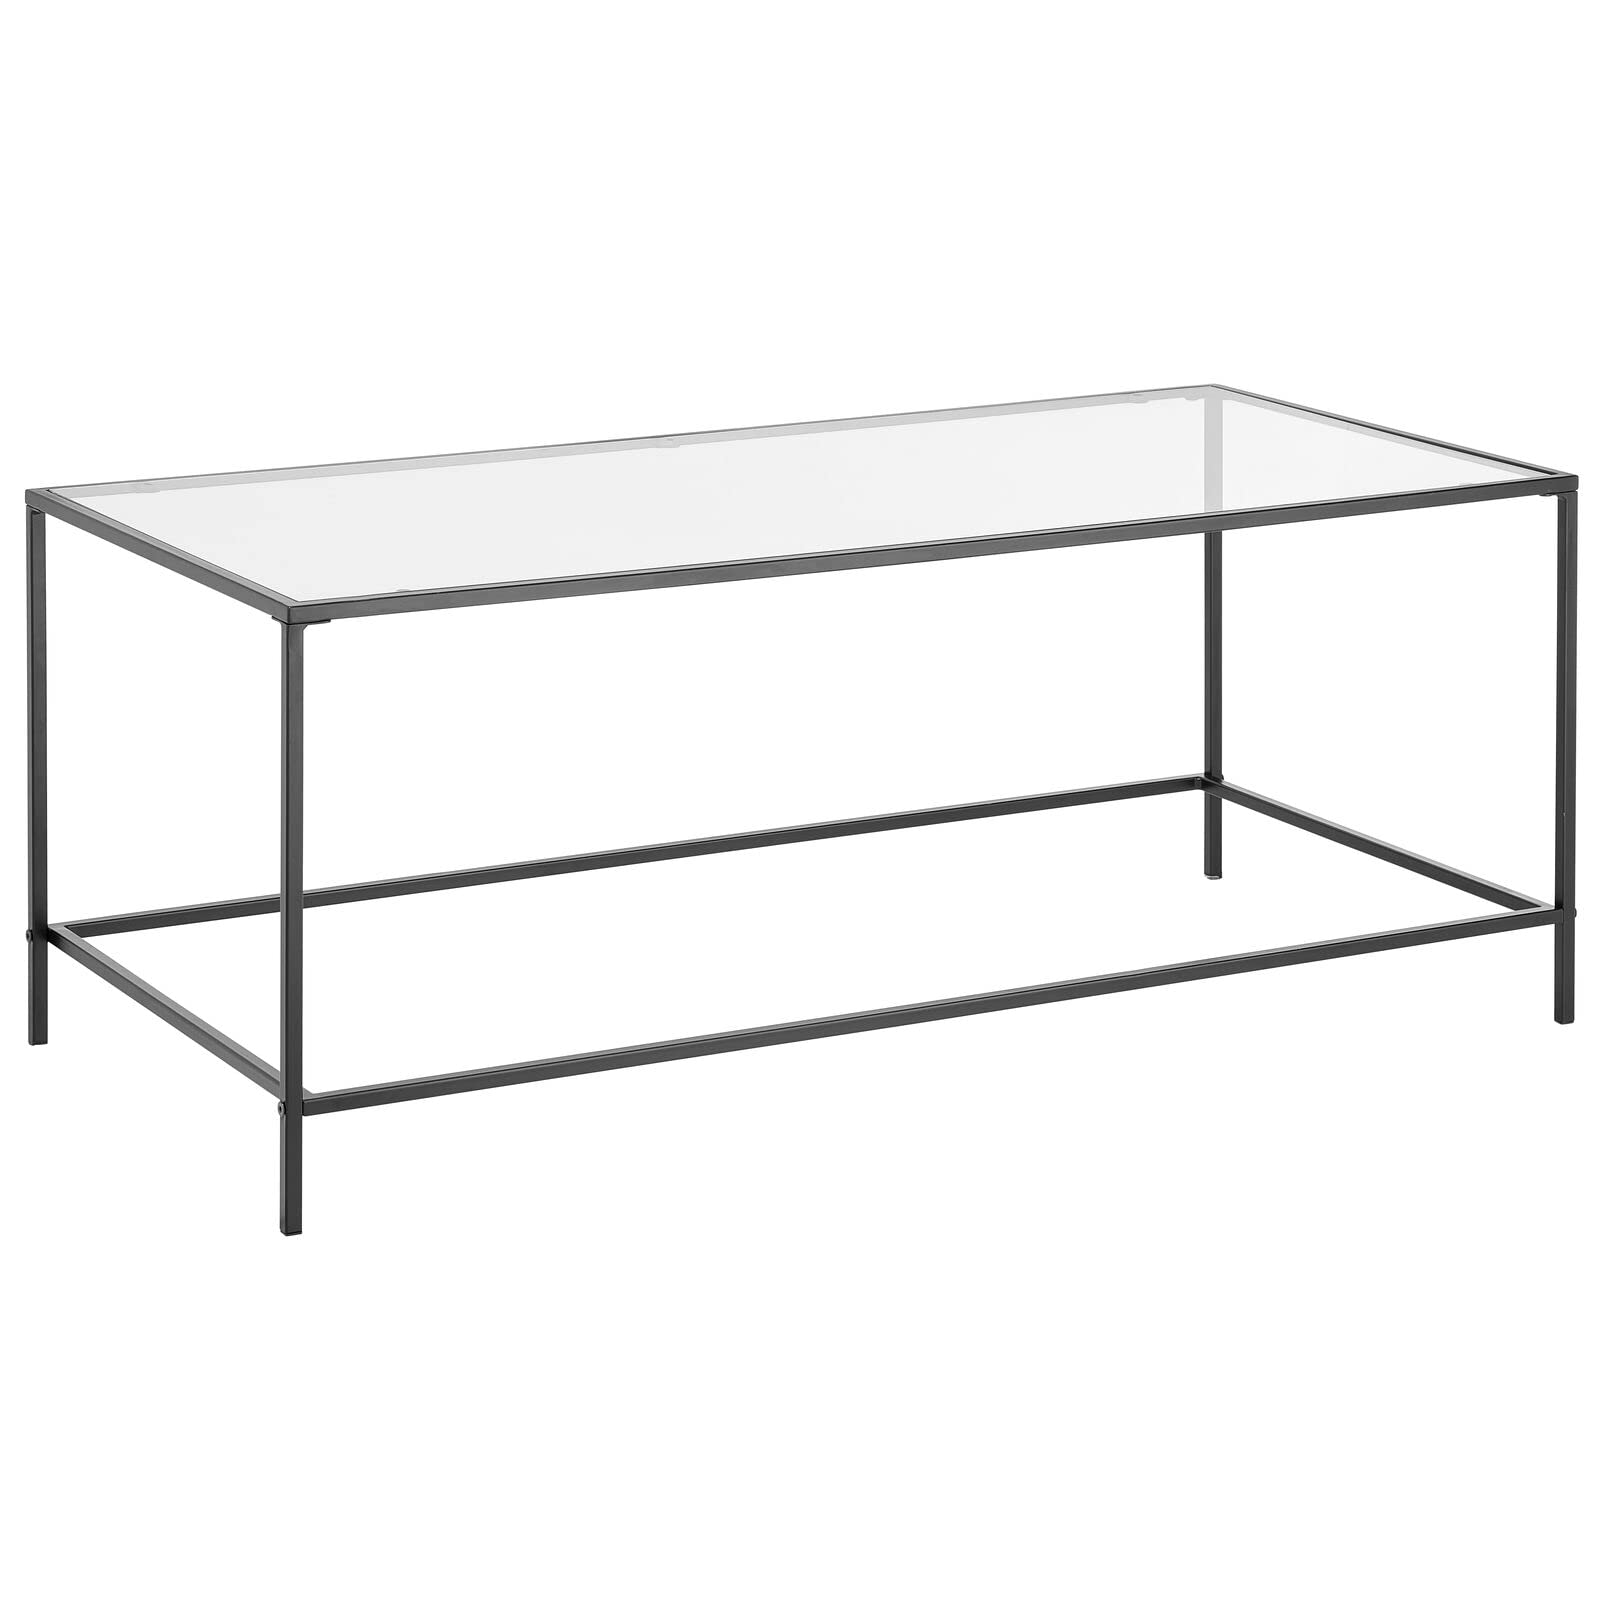 mDesign Glass Top Coffee Table - Large Minimalistic Rectangular Geometric Metal Accent Furniture Unit for Living Room, Basement, Home Office, Garage, and Bedroom - Black